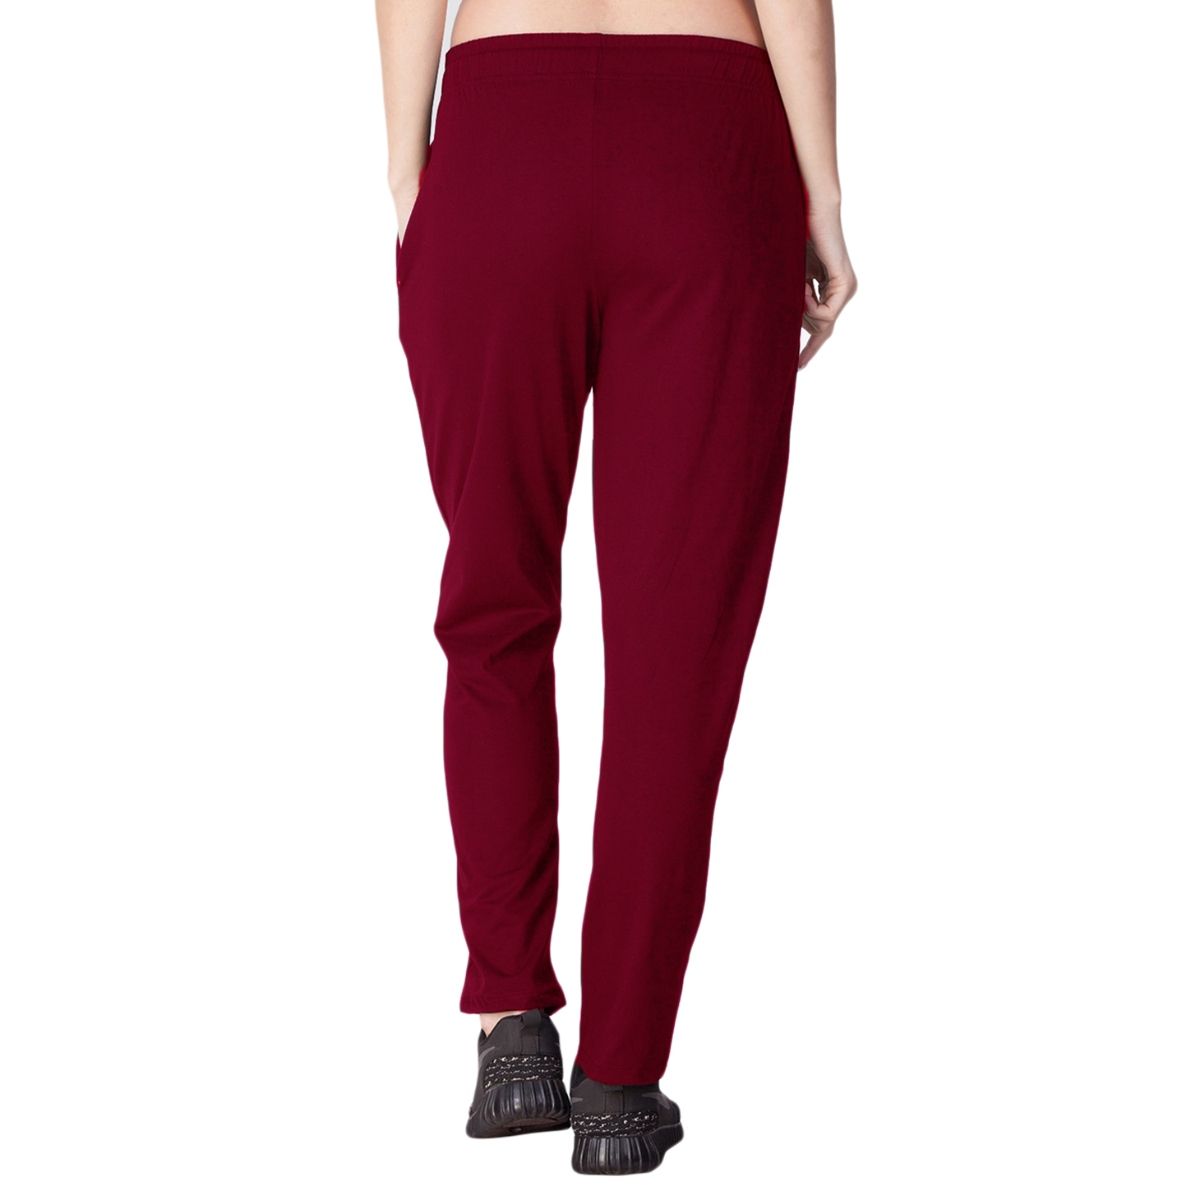 Lux Lyra Women's Track Pant 312 -Red: Buy Lux Lyra Women's Track Pant ...